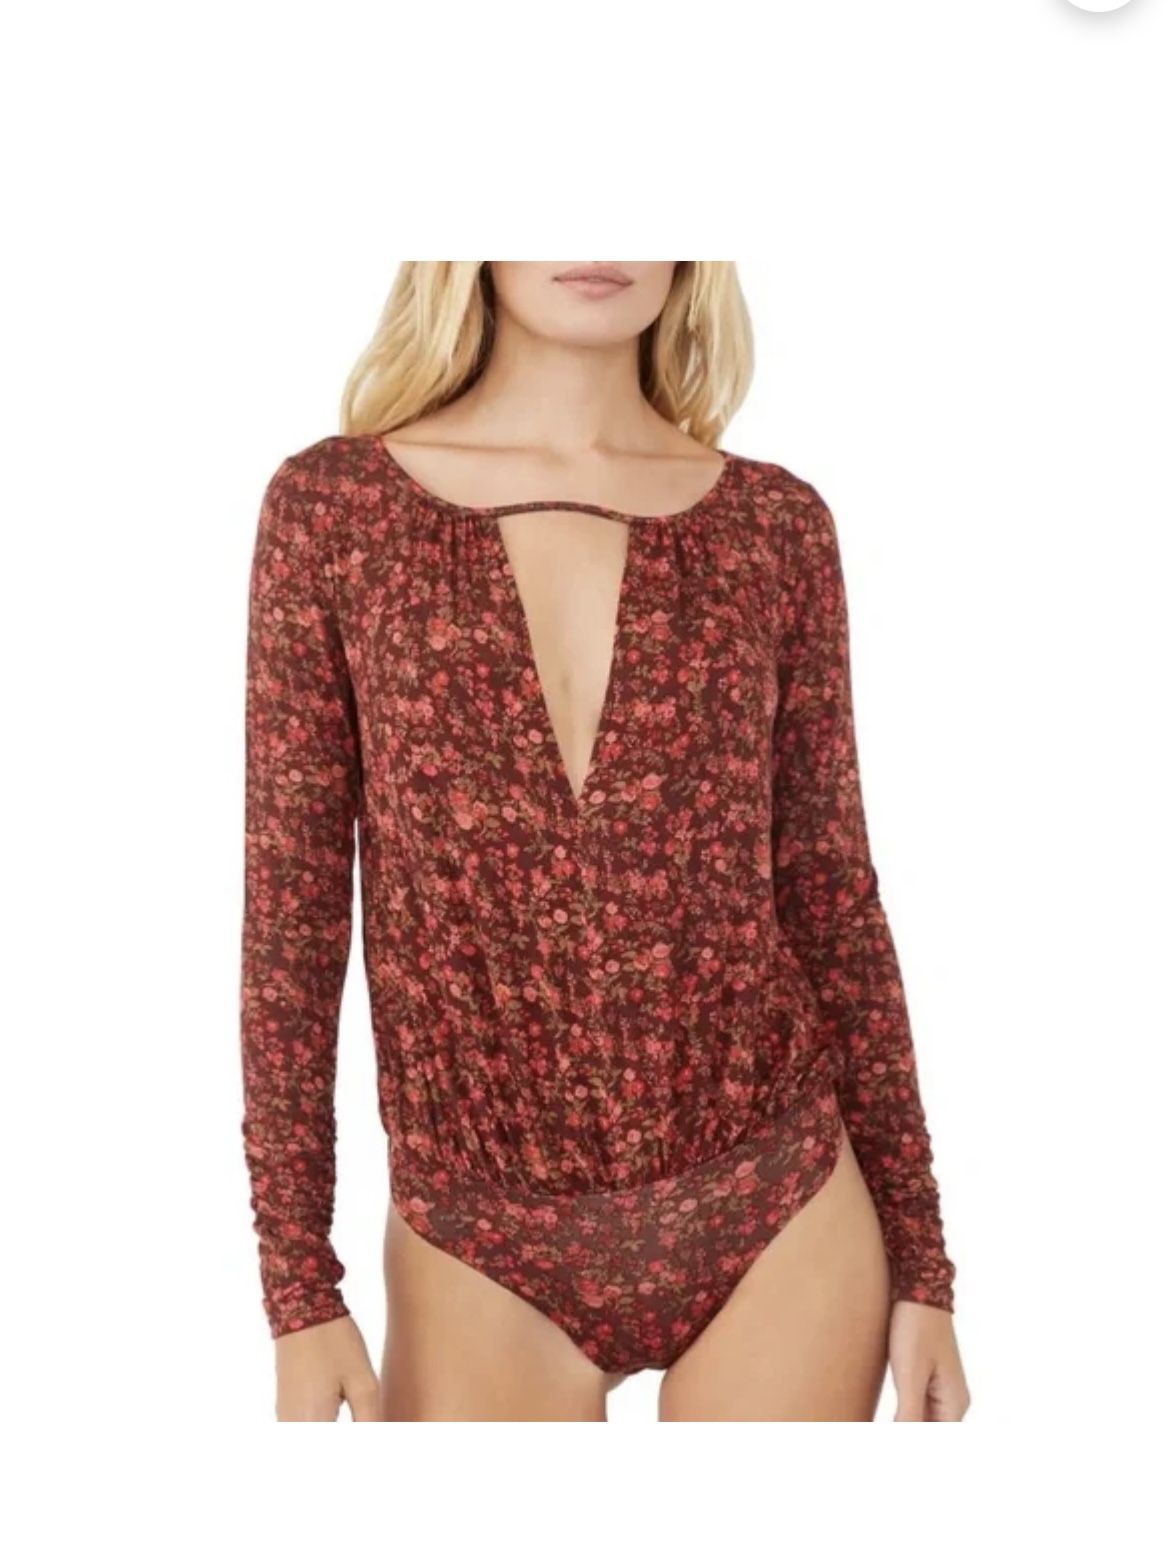 FREE PEOPLE INTIMATELY red floral Kaya cutout bodysuit sz Med